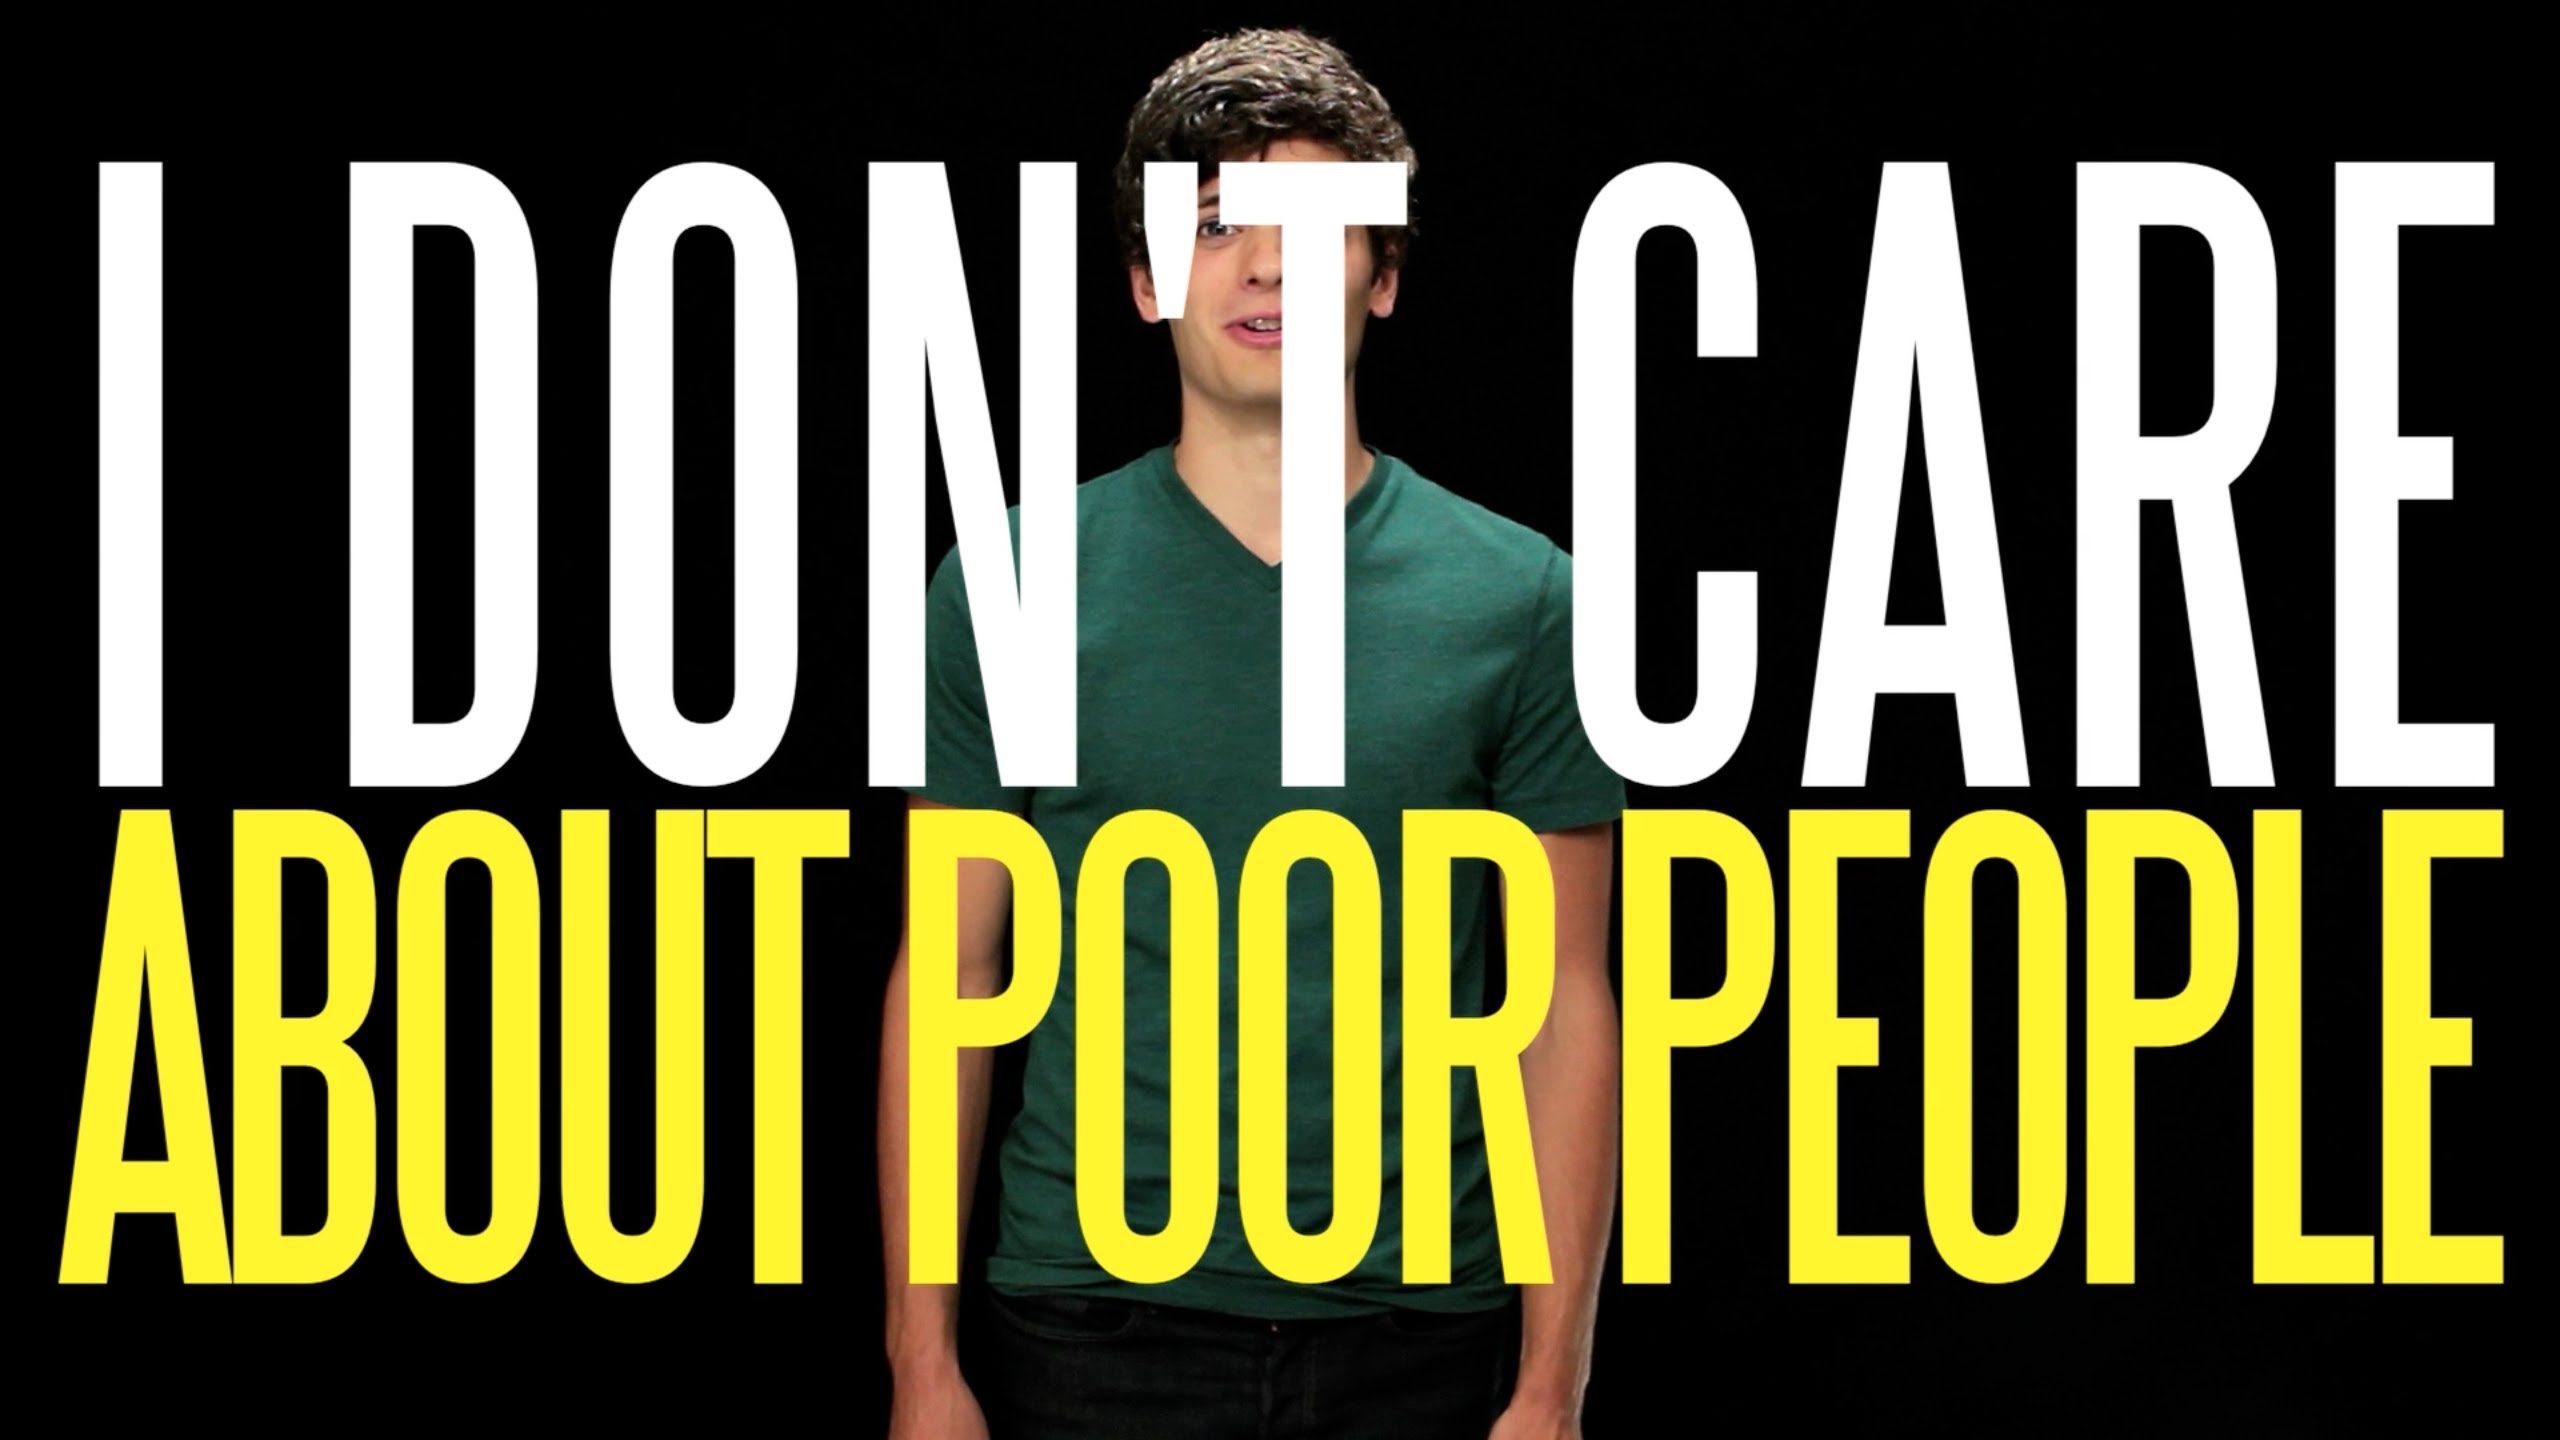 Five Reasons I Don't Care about Poor People - YouTube